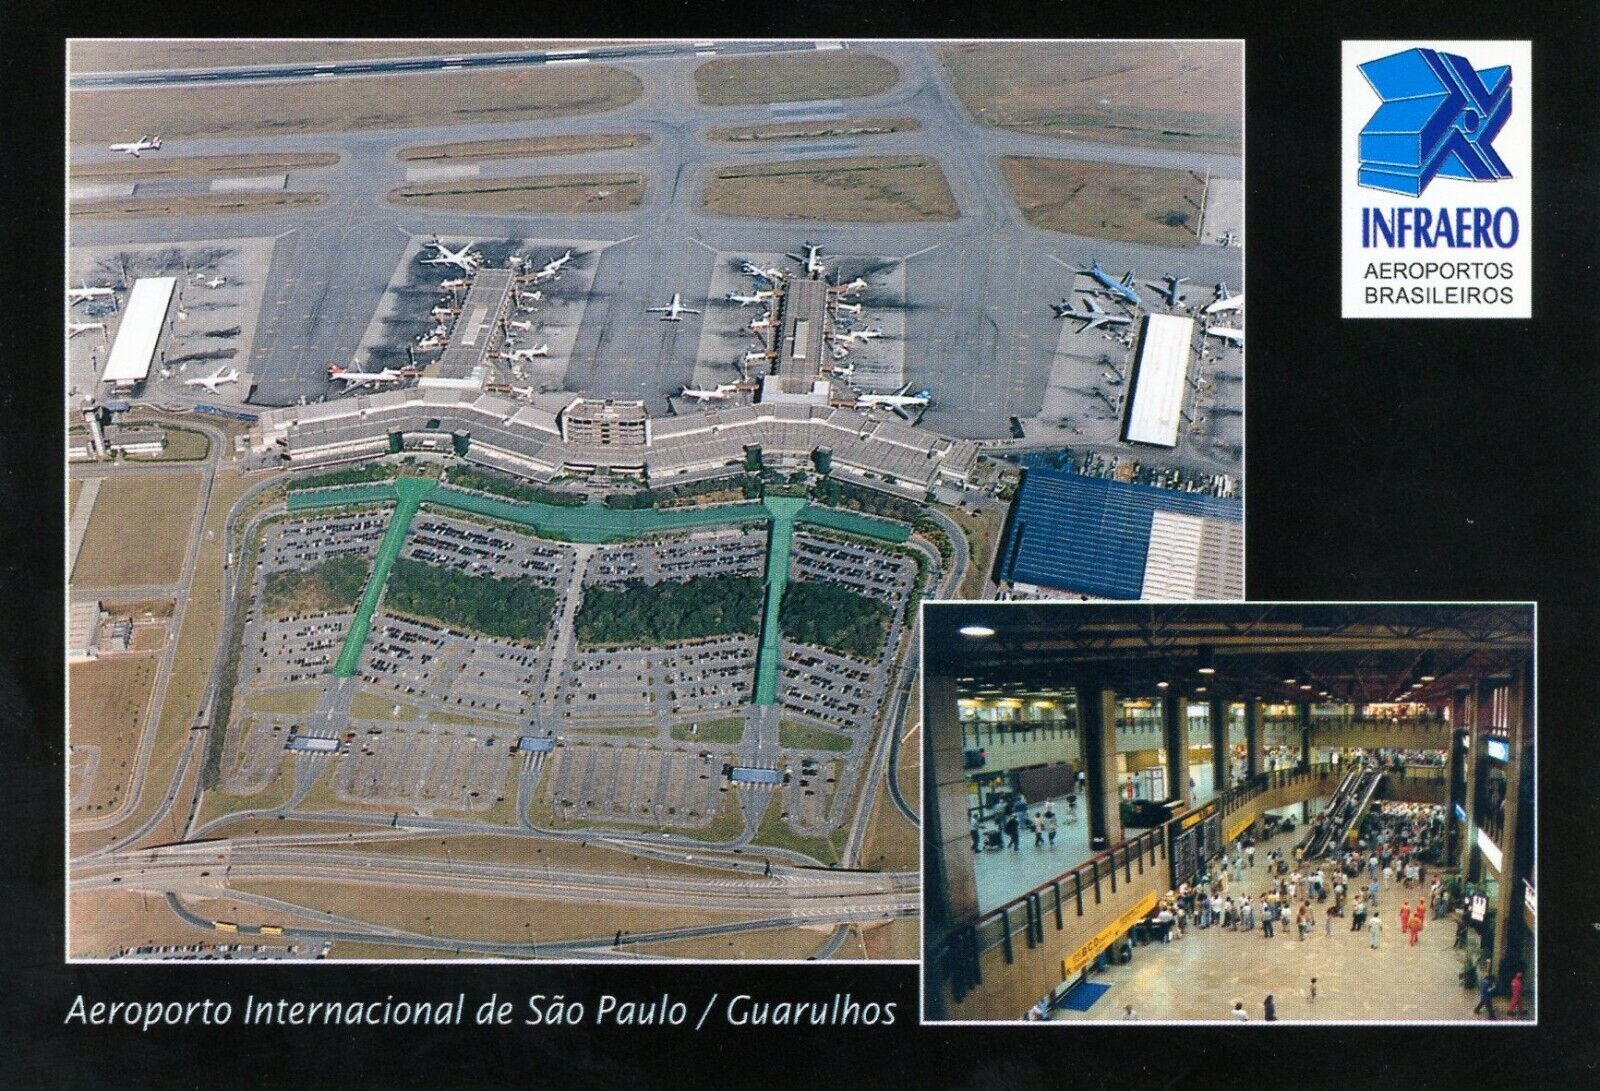 BRAZIL   AIRPORT  GUARULHOS   /   AIRLINES   /  AIRCRAFT / AIRPLANE   200